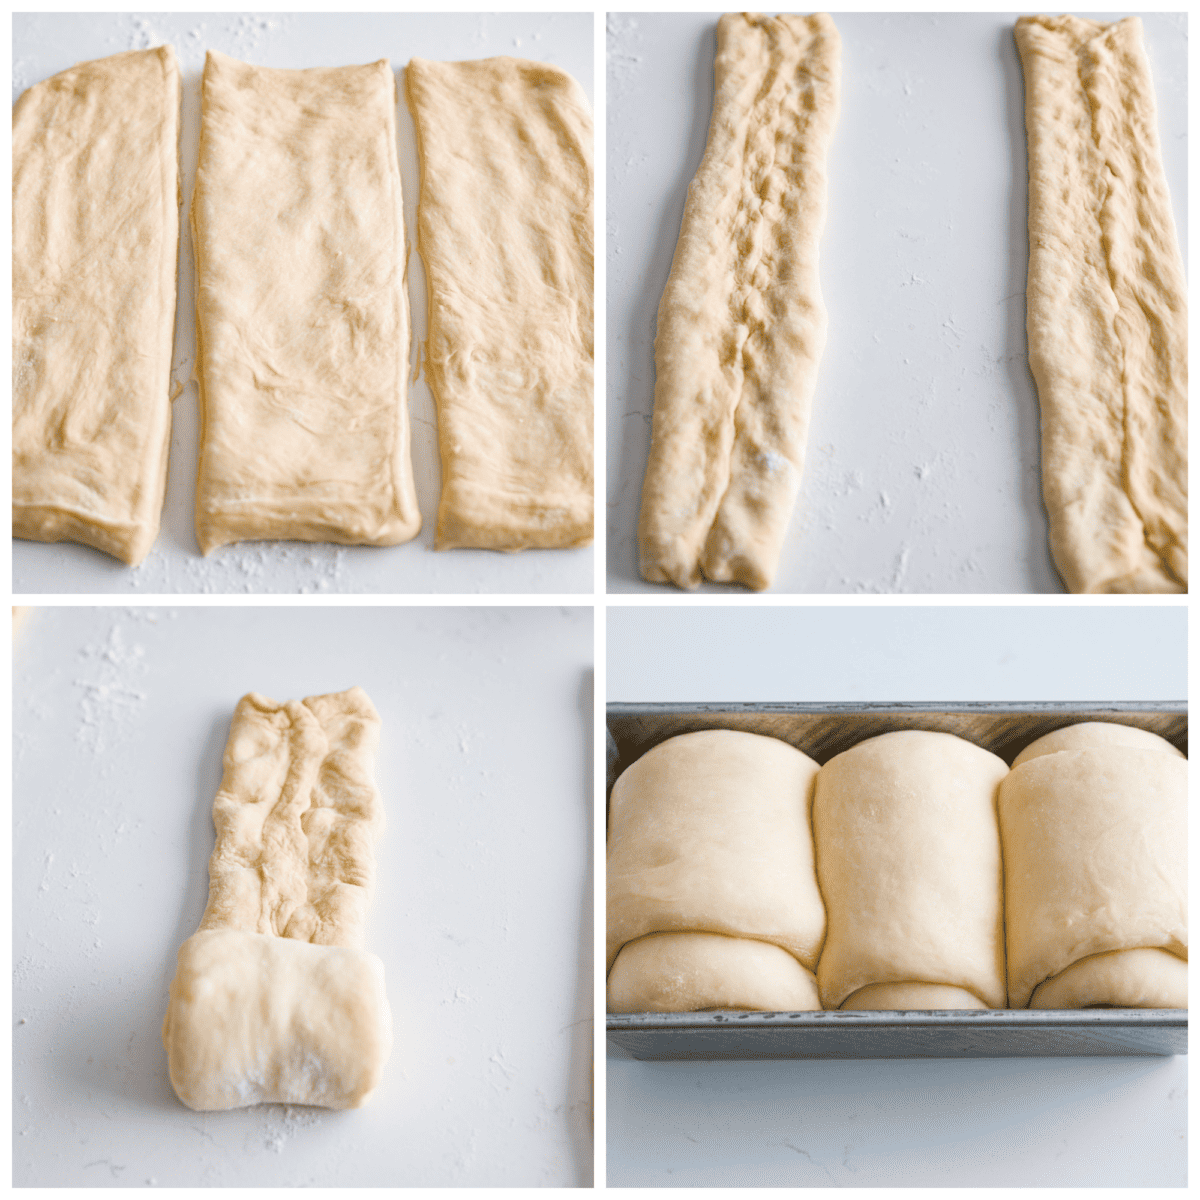 4-photo collage of the dough being shaped and arranged.